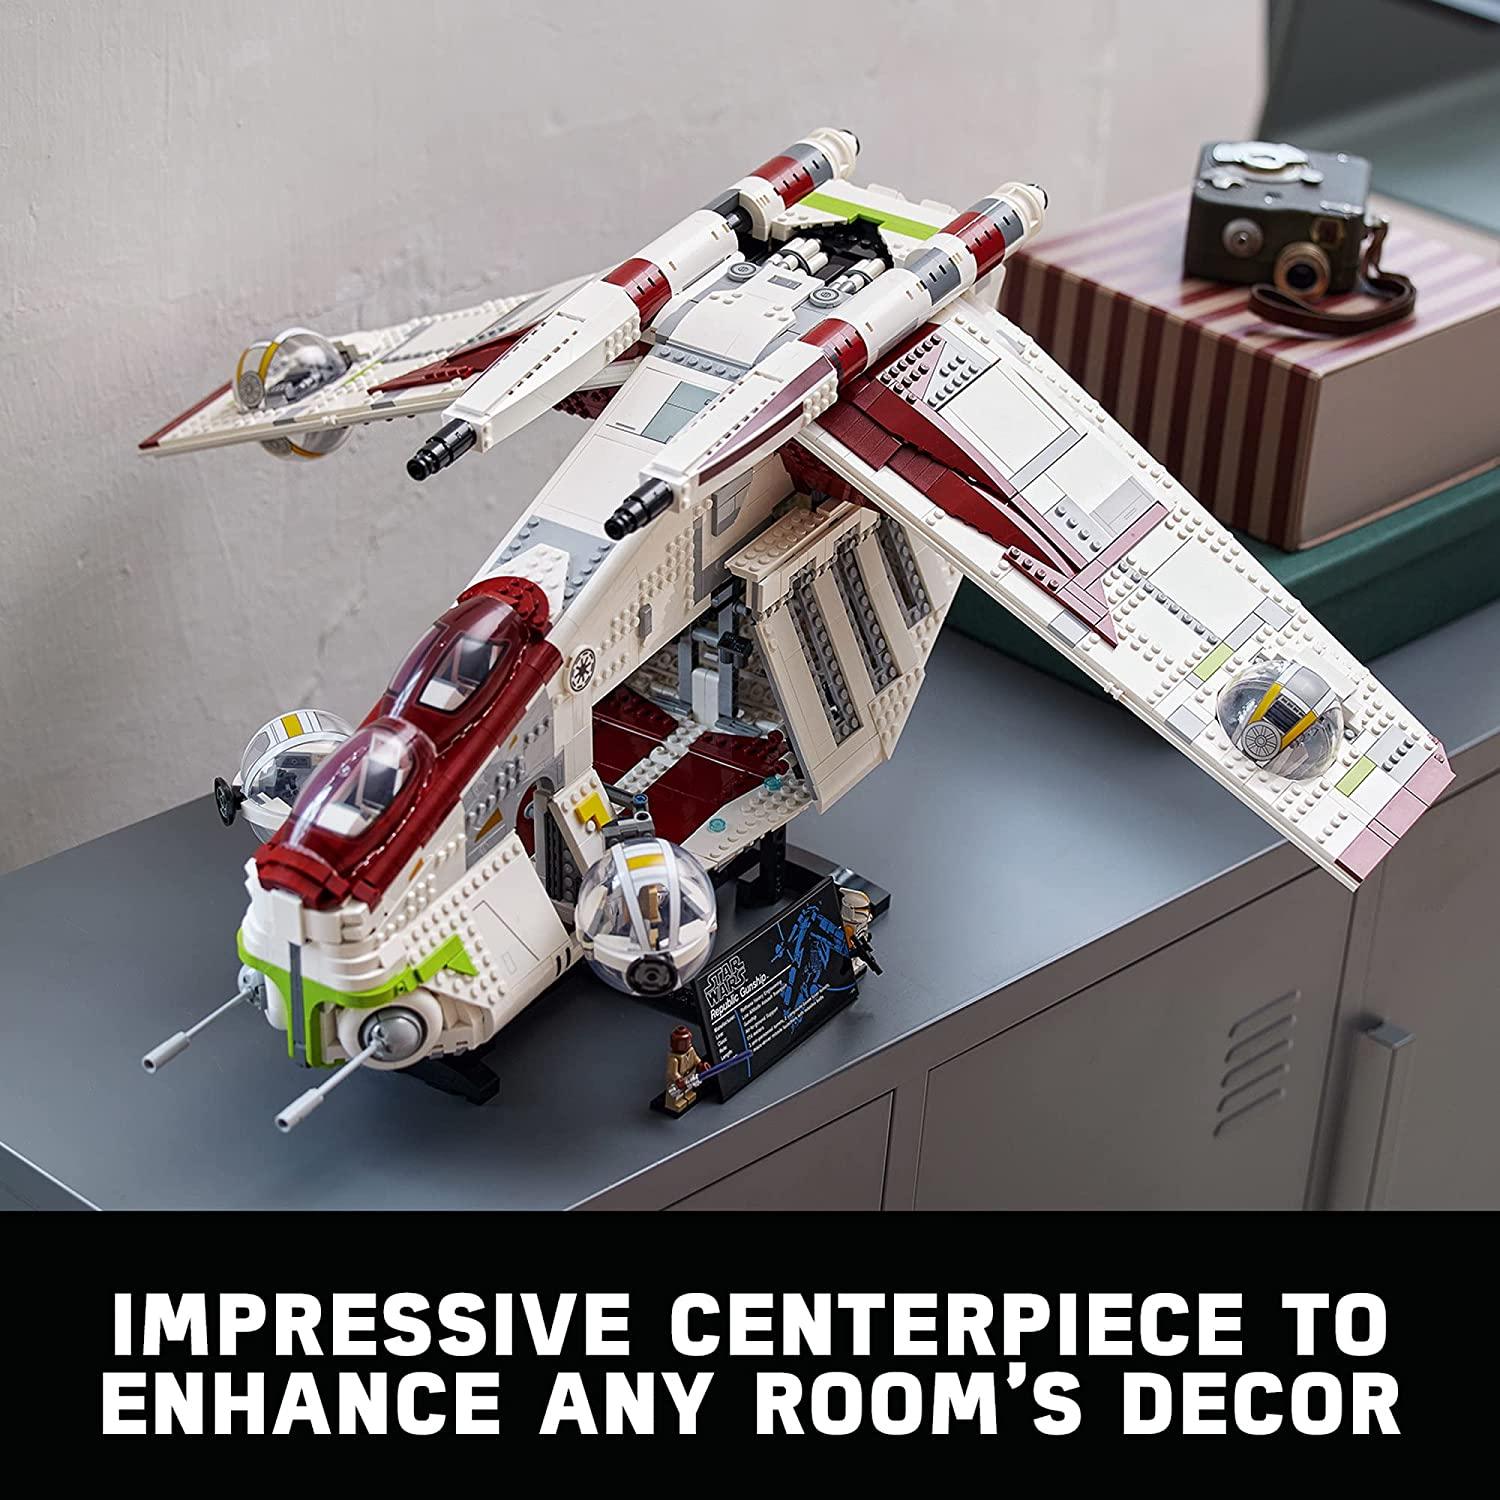 LEGO Star Wars Republic Gunship 75309 Building Kit; Cool, Ultimate Collector Series Build-and-Display Model (3,292 Pieces) - BumbleToys - 18+, Boys, LEGO, OXE, Pre-Order, star wars